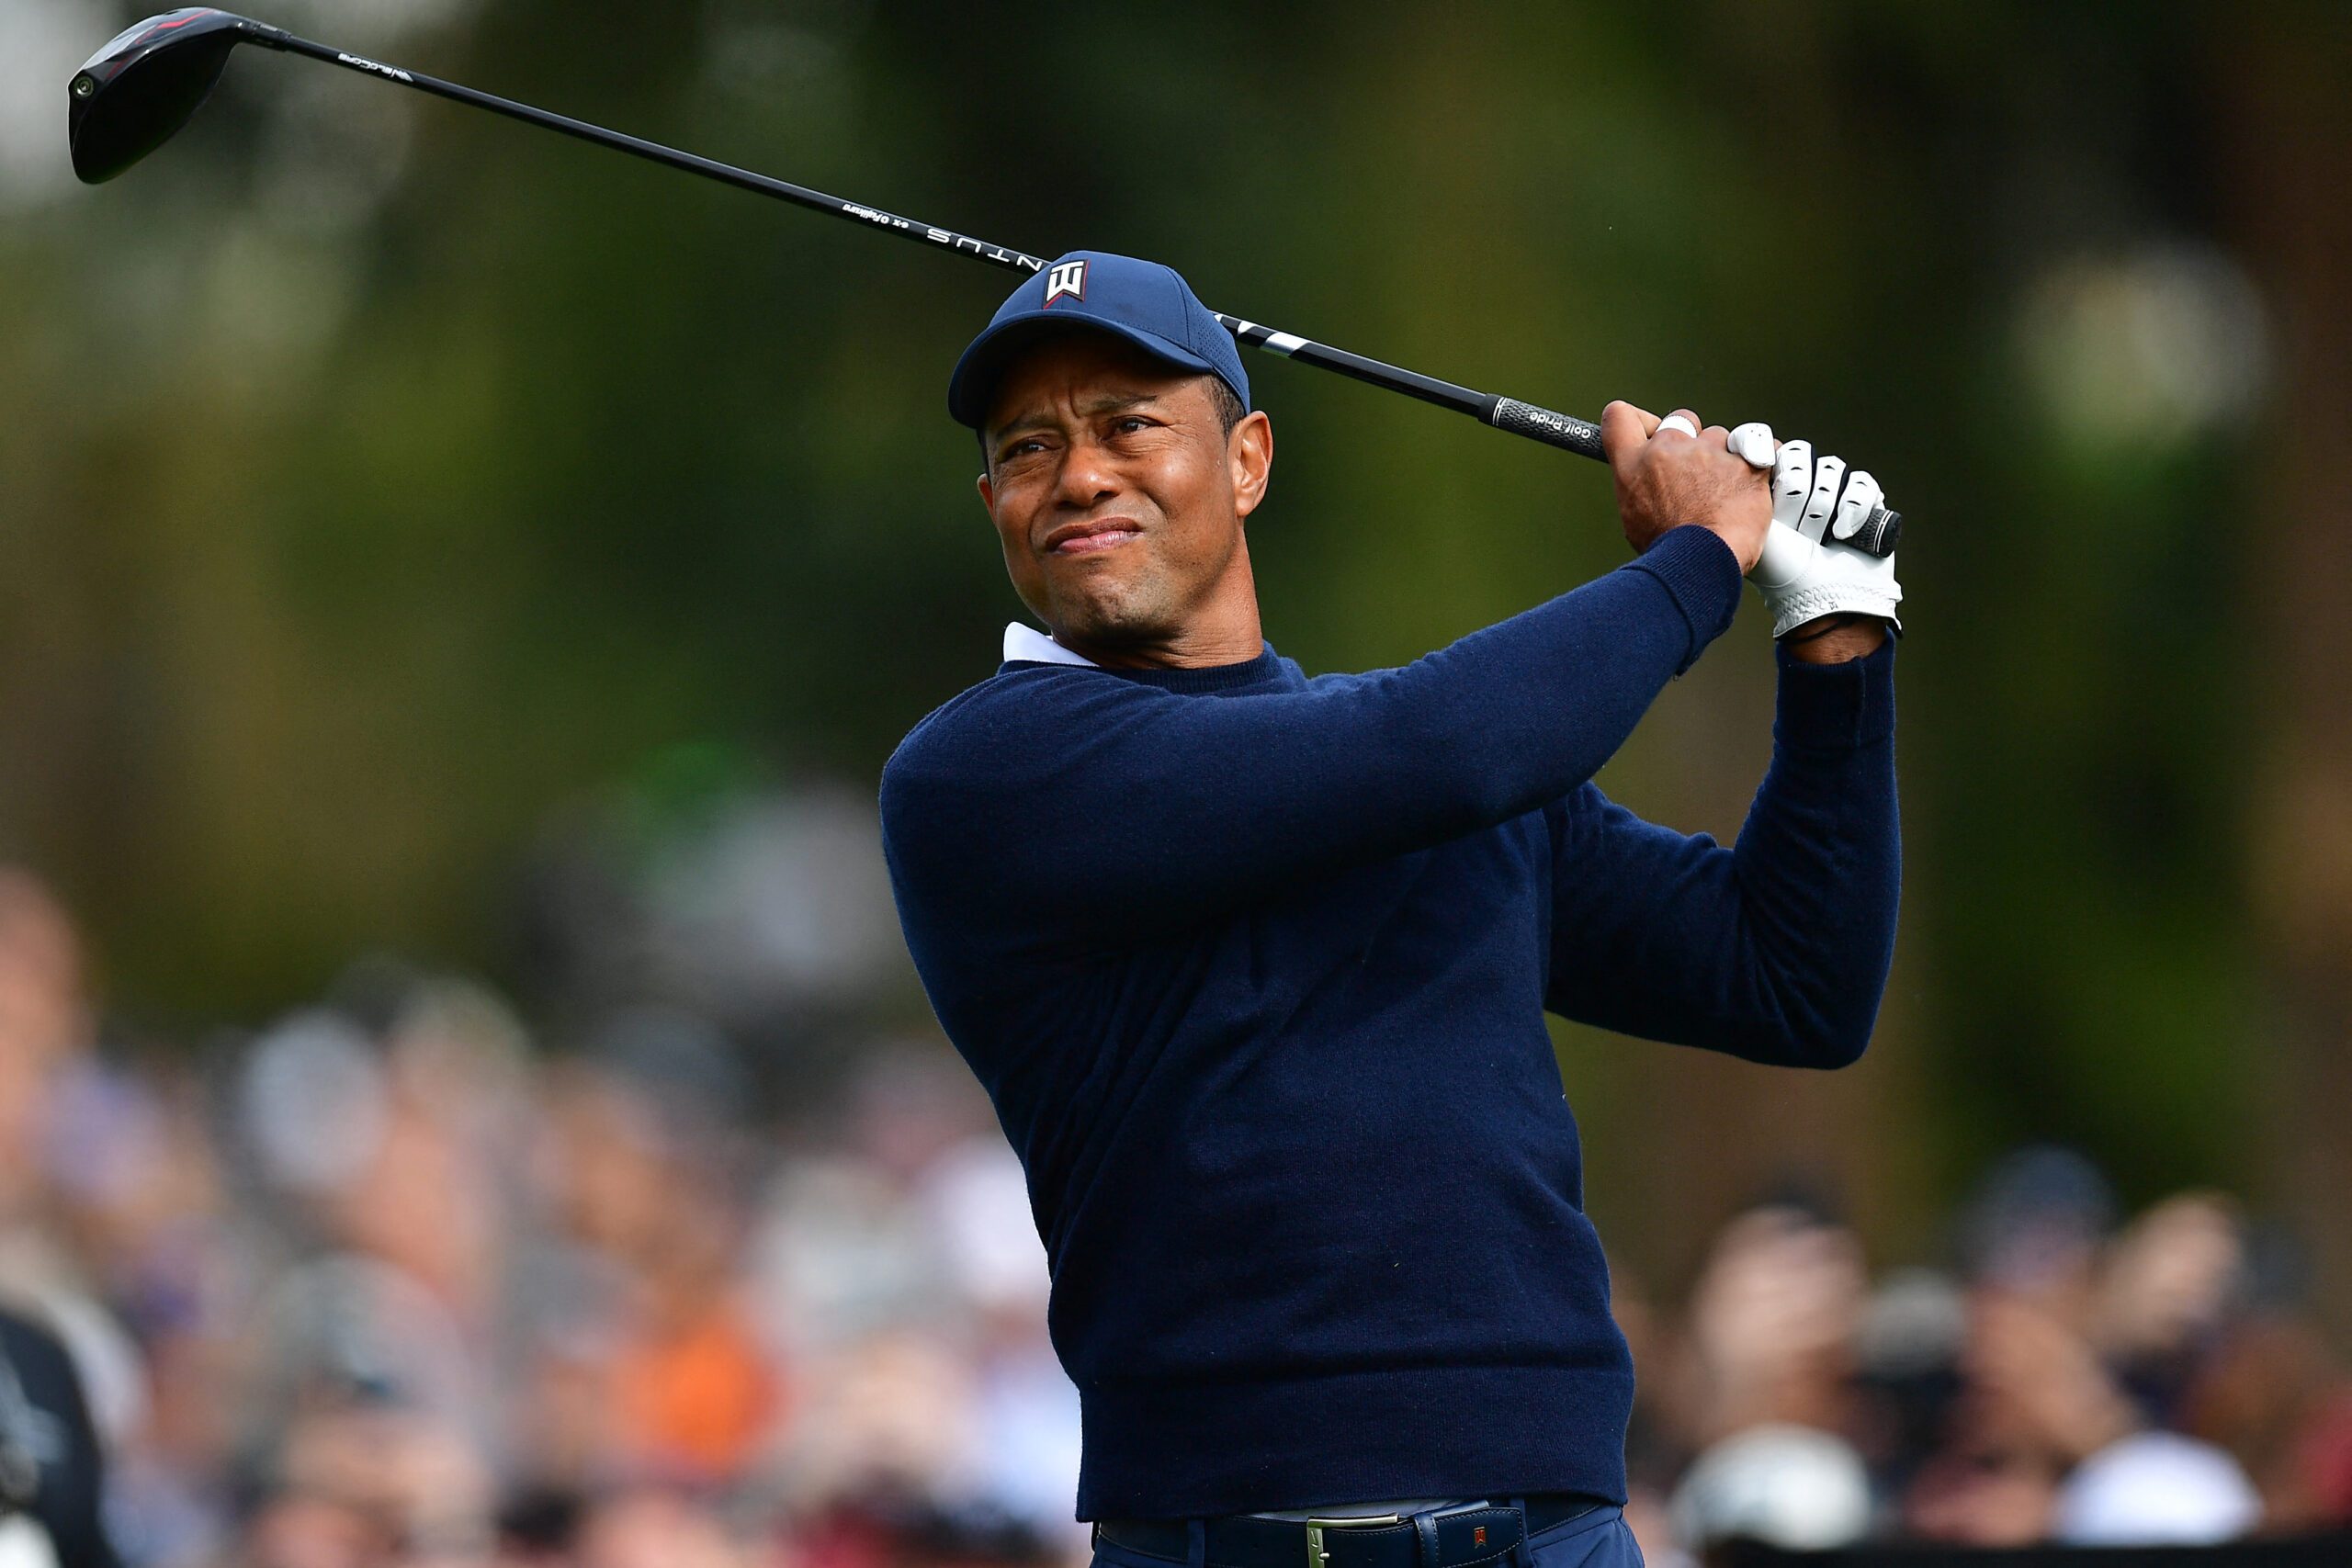 Tiger Woods apologizes for tampon prank, poised to make cut